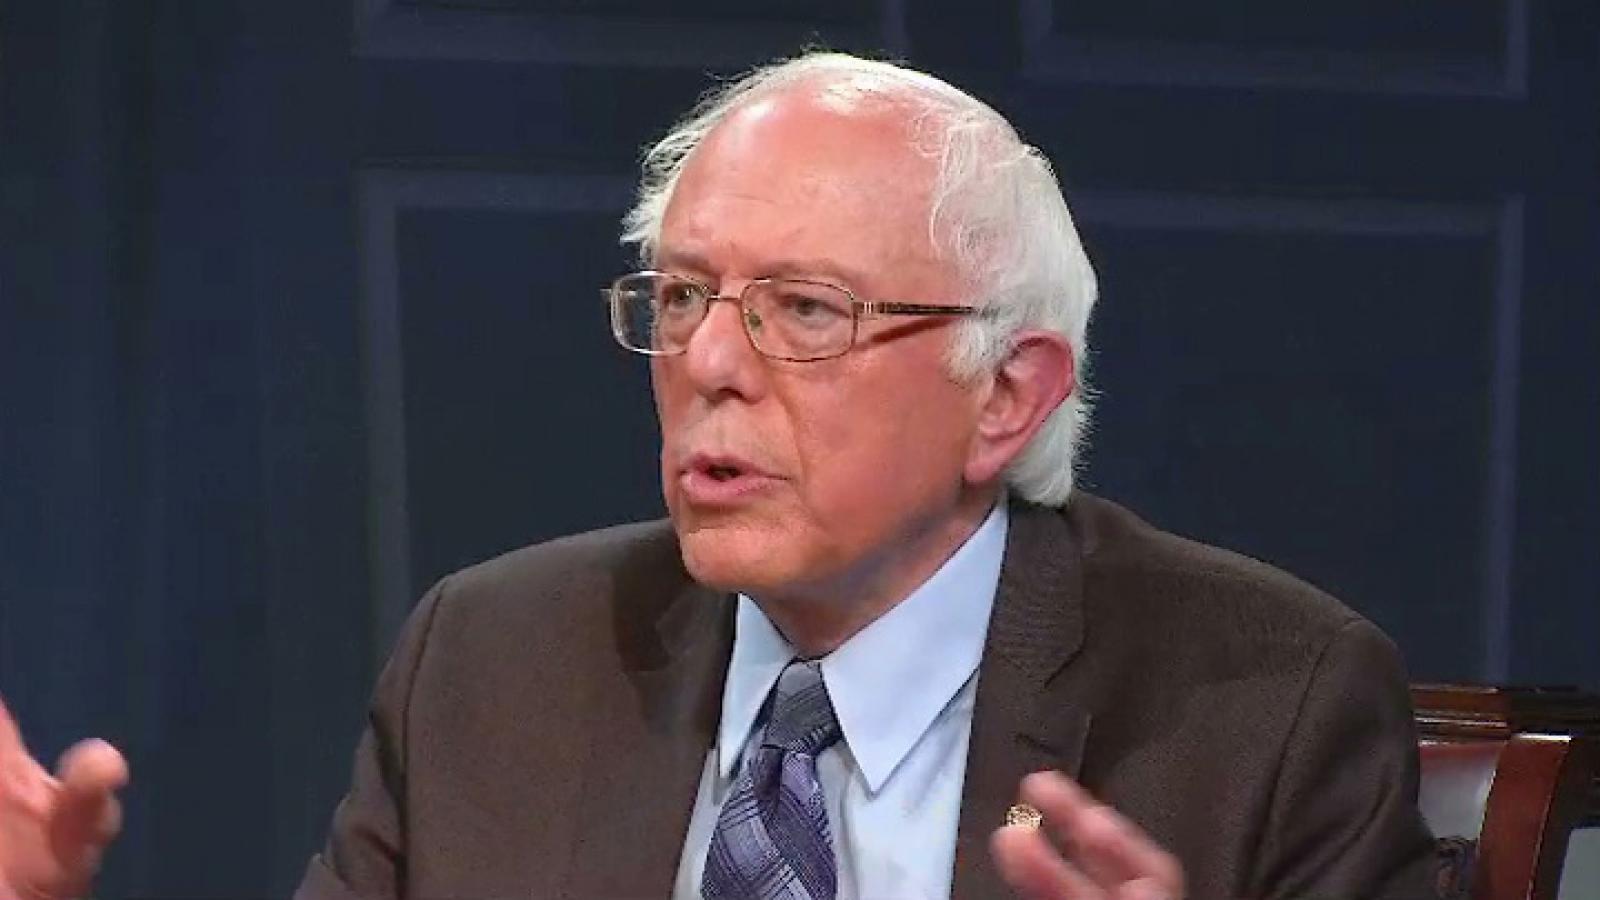 Senator Bernie Sanders discusses his run for the 2016 Democratic presidential nomination and political trends in the country